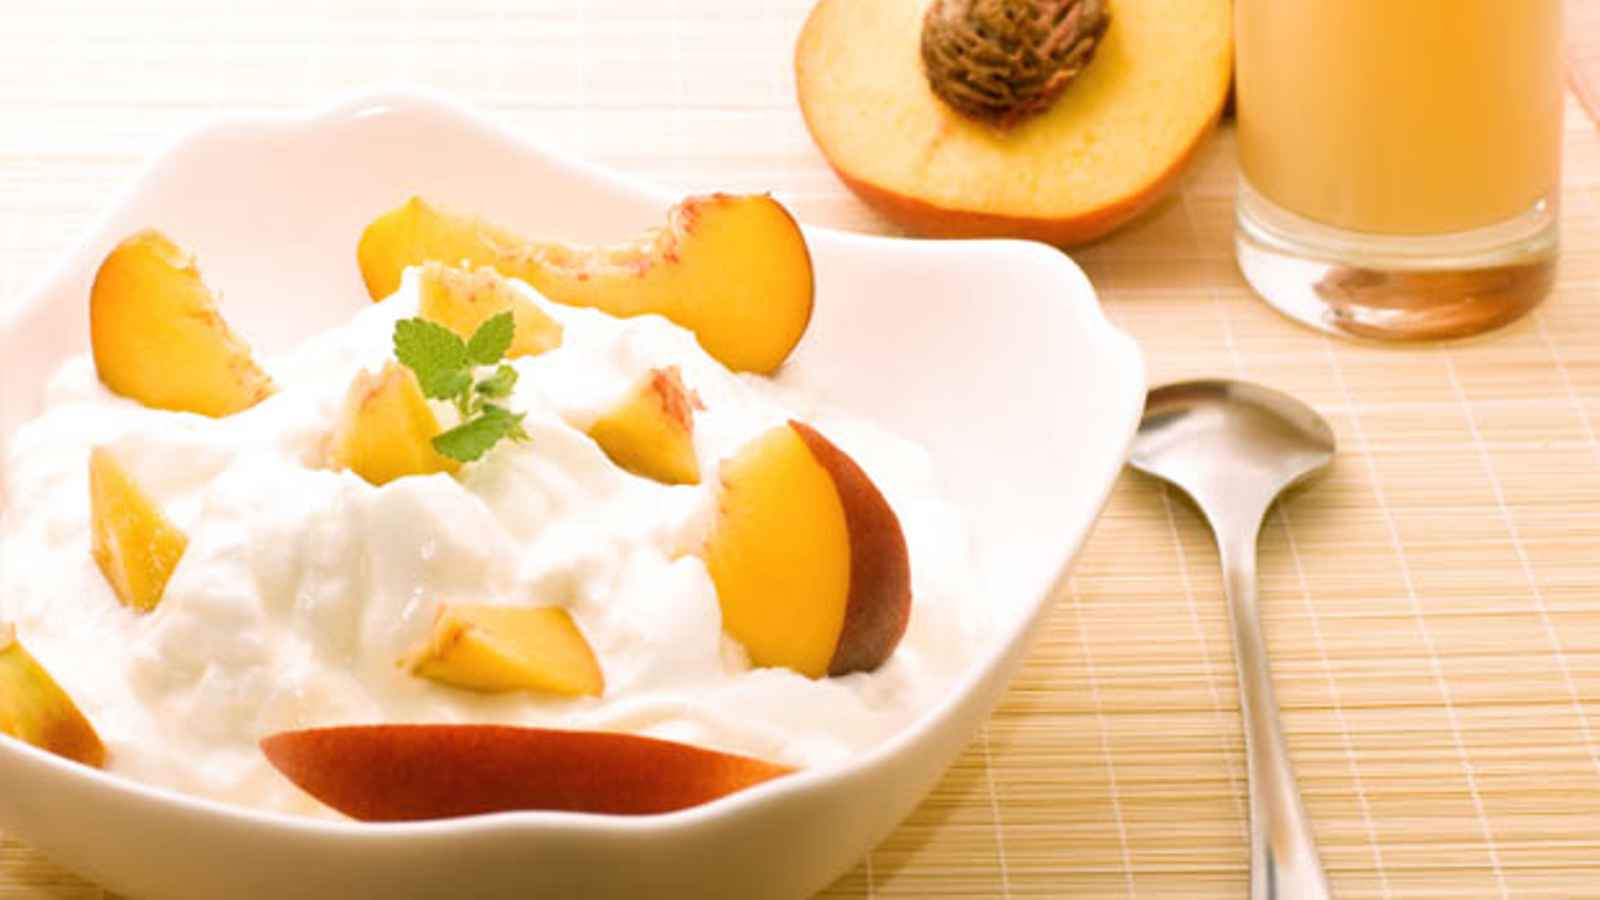 National Peaches ‘N’ Cream Day 2023: Date, History, Facts about Peaches